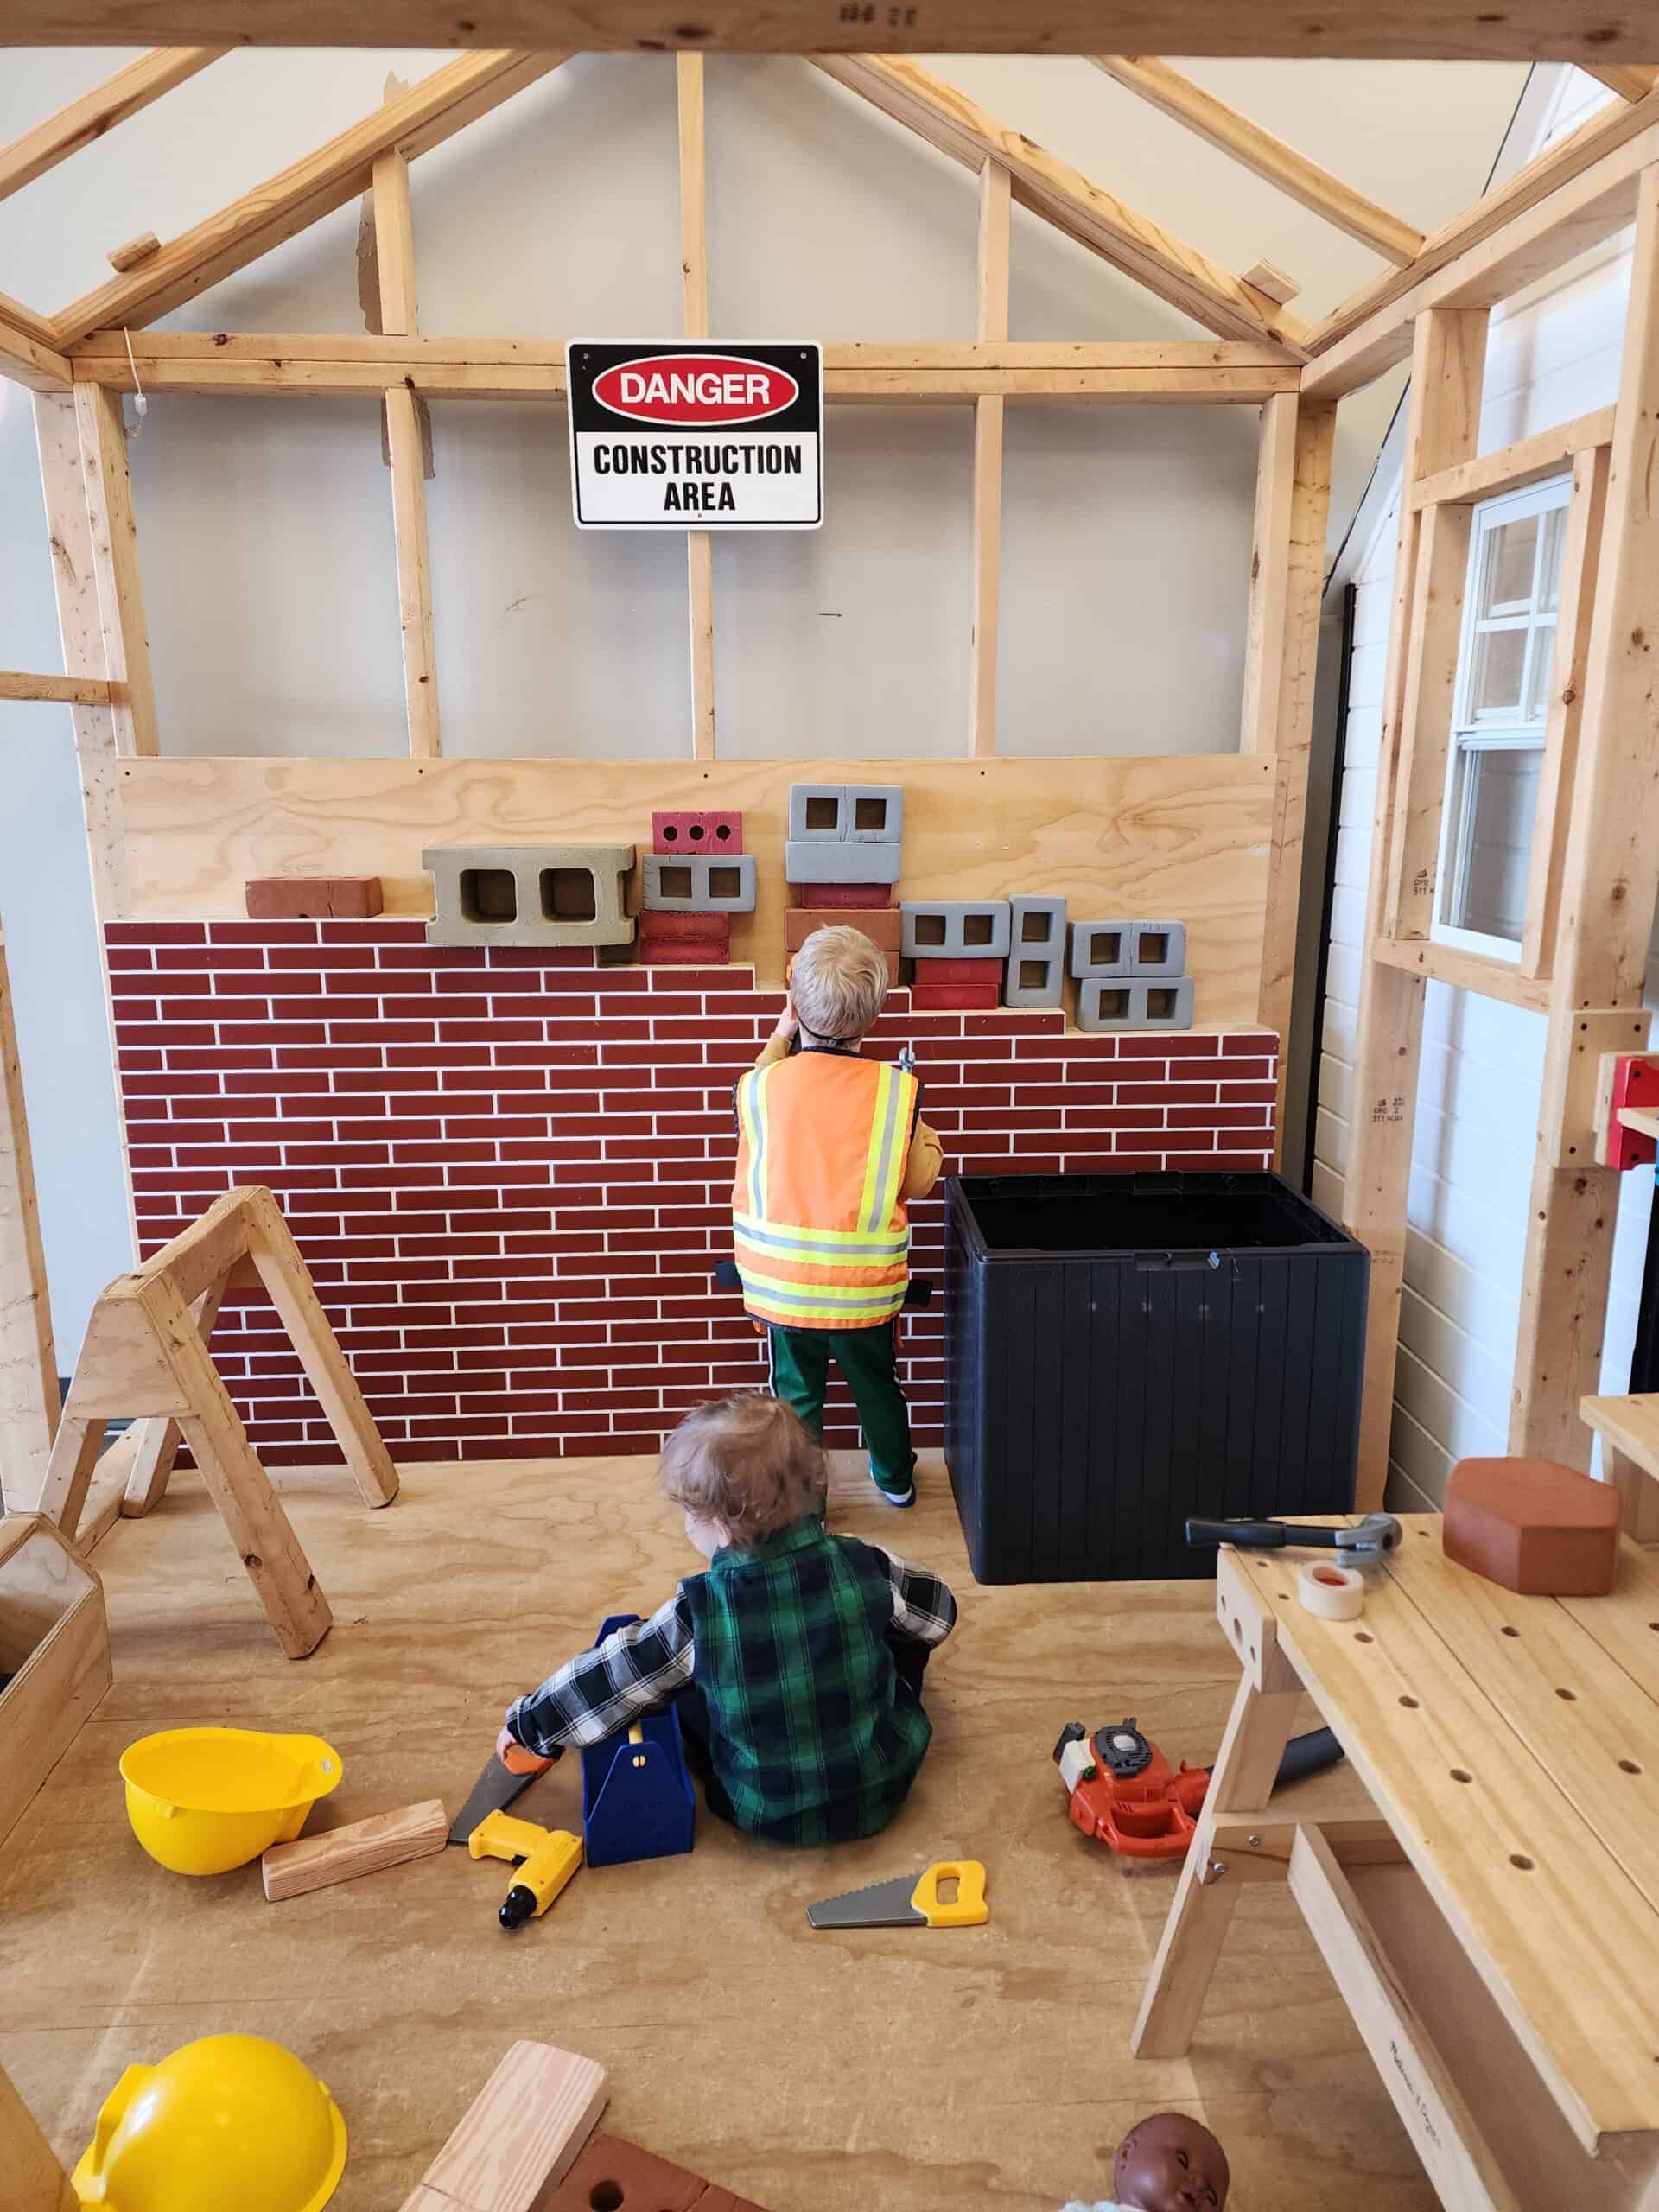 Young children in play construction vests engage in creative play at a 'Construction Area' within Piney Town Playhouse in Fuquay-Varina, NC, complete with toy tools, wooden blocks, and a brick wall backdrop, fostering a hands-on learning environment